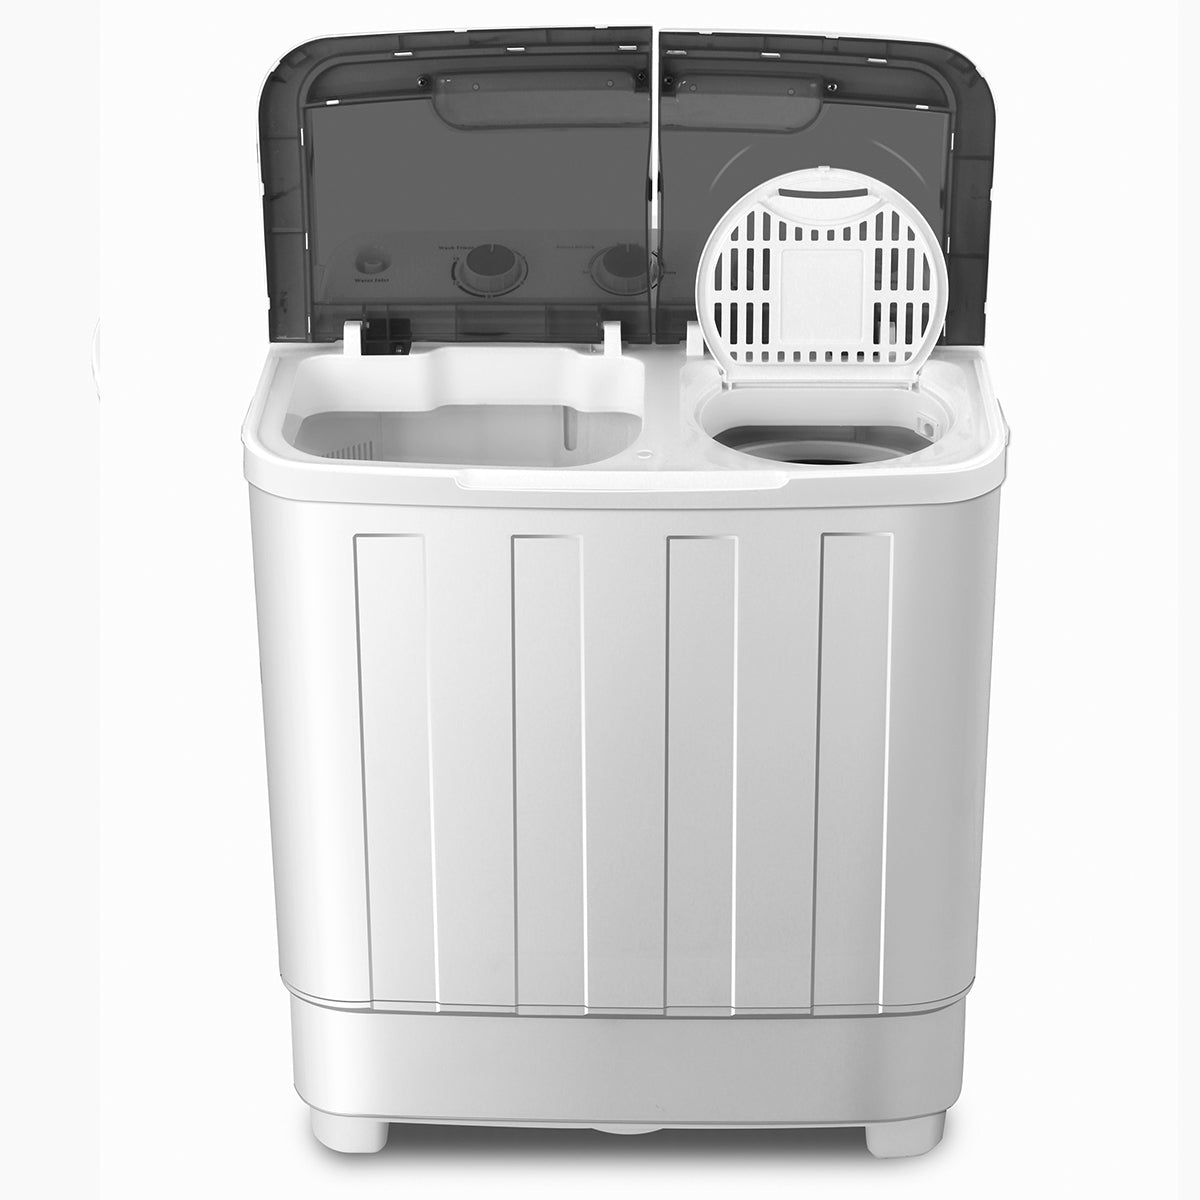 Both tubs of the Portable Twin Tub Washing Machine open.